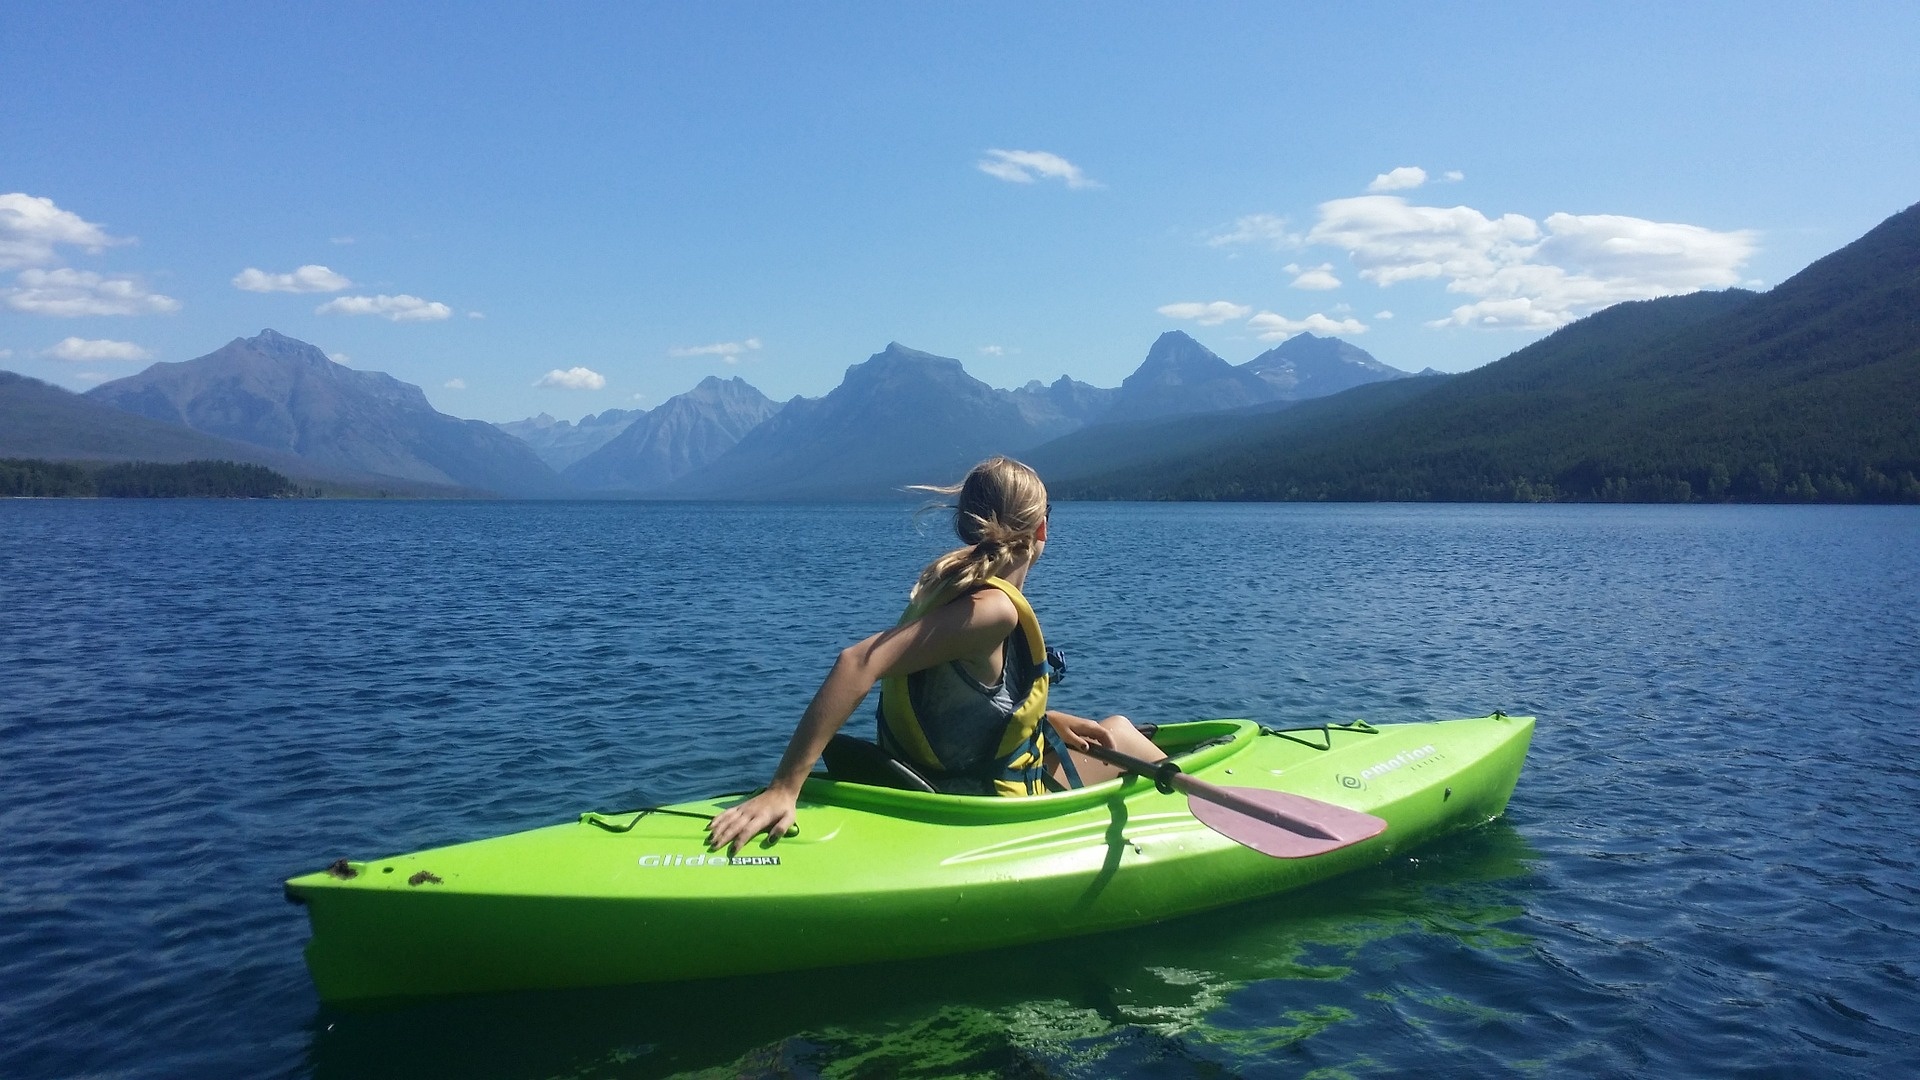 Kayaking: The female kayaker looks at the majestic mountains, Recreational water trip. 1920x1080 Full HD Background.